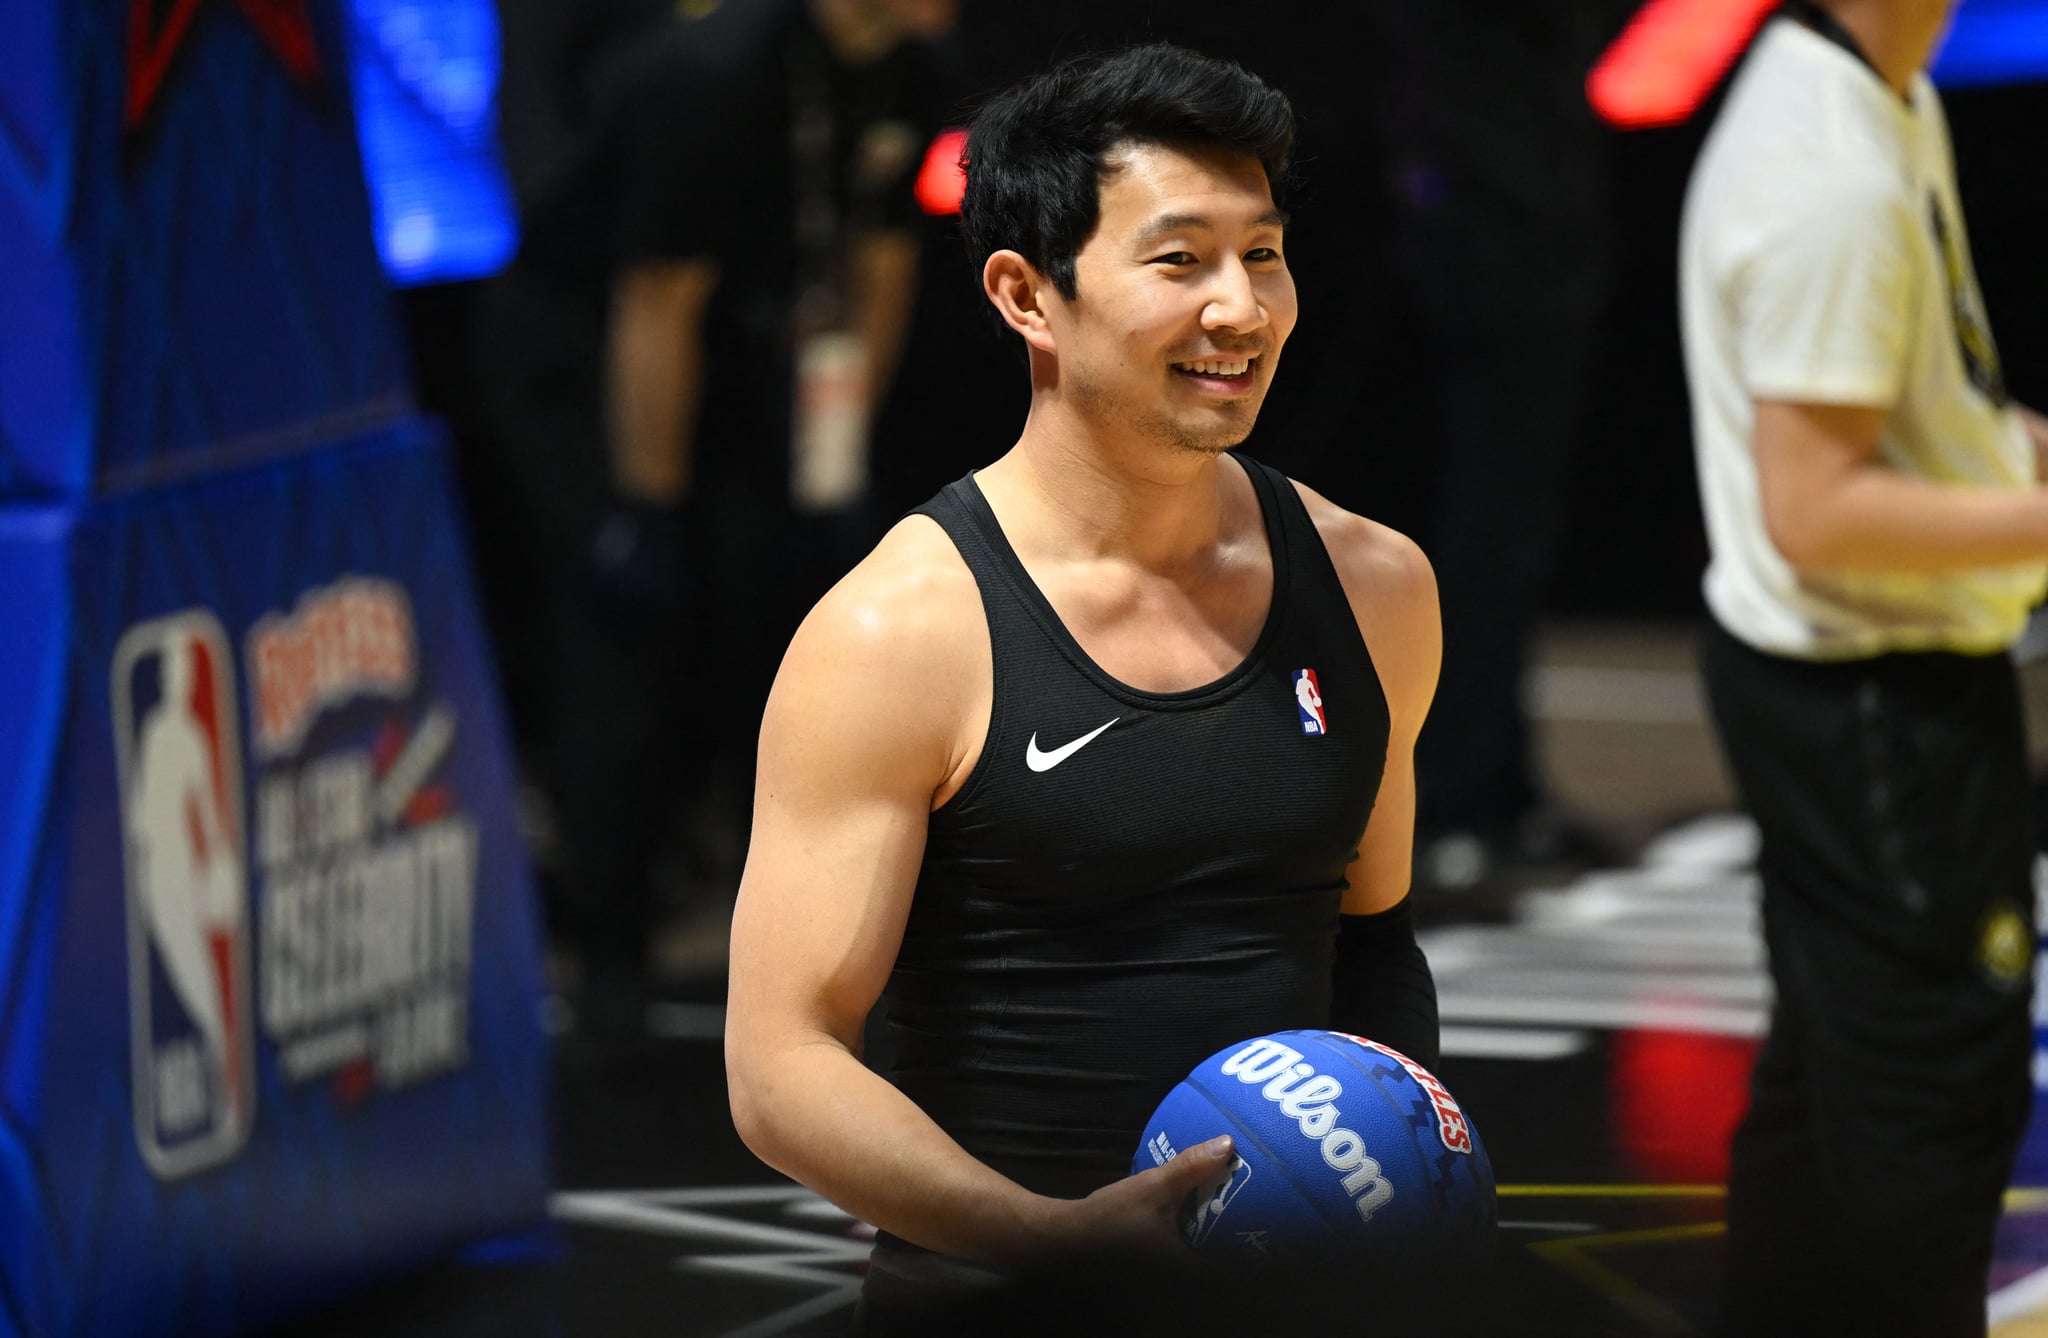 Canadian actor Simu Liu attends the 2023 Ruffles All-Star Celebrity Game during NBA All-Star Weekend in Salt Lake City, Utah, February 17, 2023. (Photo by Patrick T. Fallon / AFP) (Photo by PATRICK T. FALLON/AFP via Getty Images)